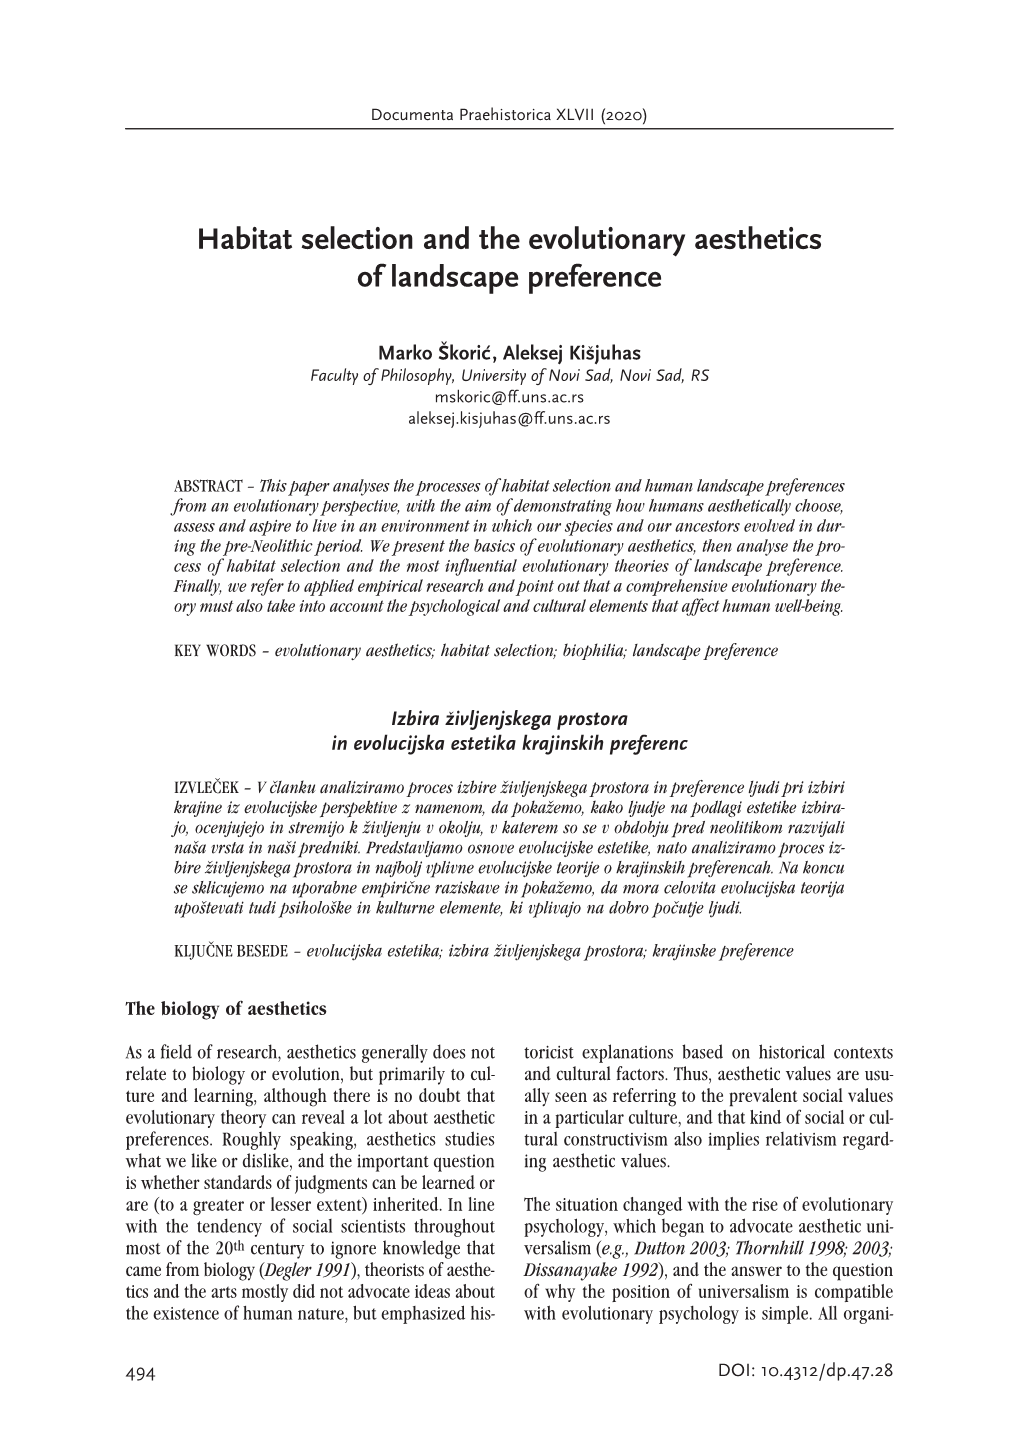 Habitat Selection and the Evolutionary Aesthetics of Landscape Preference